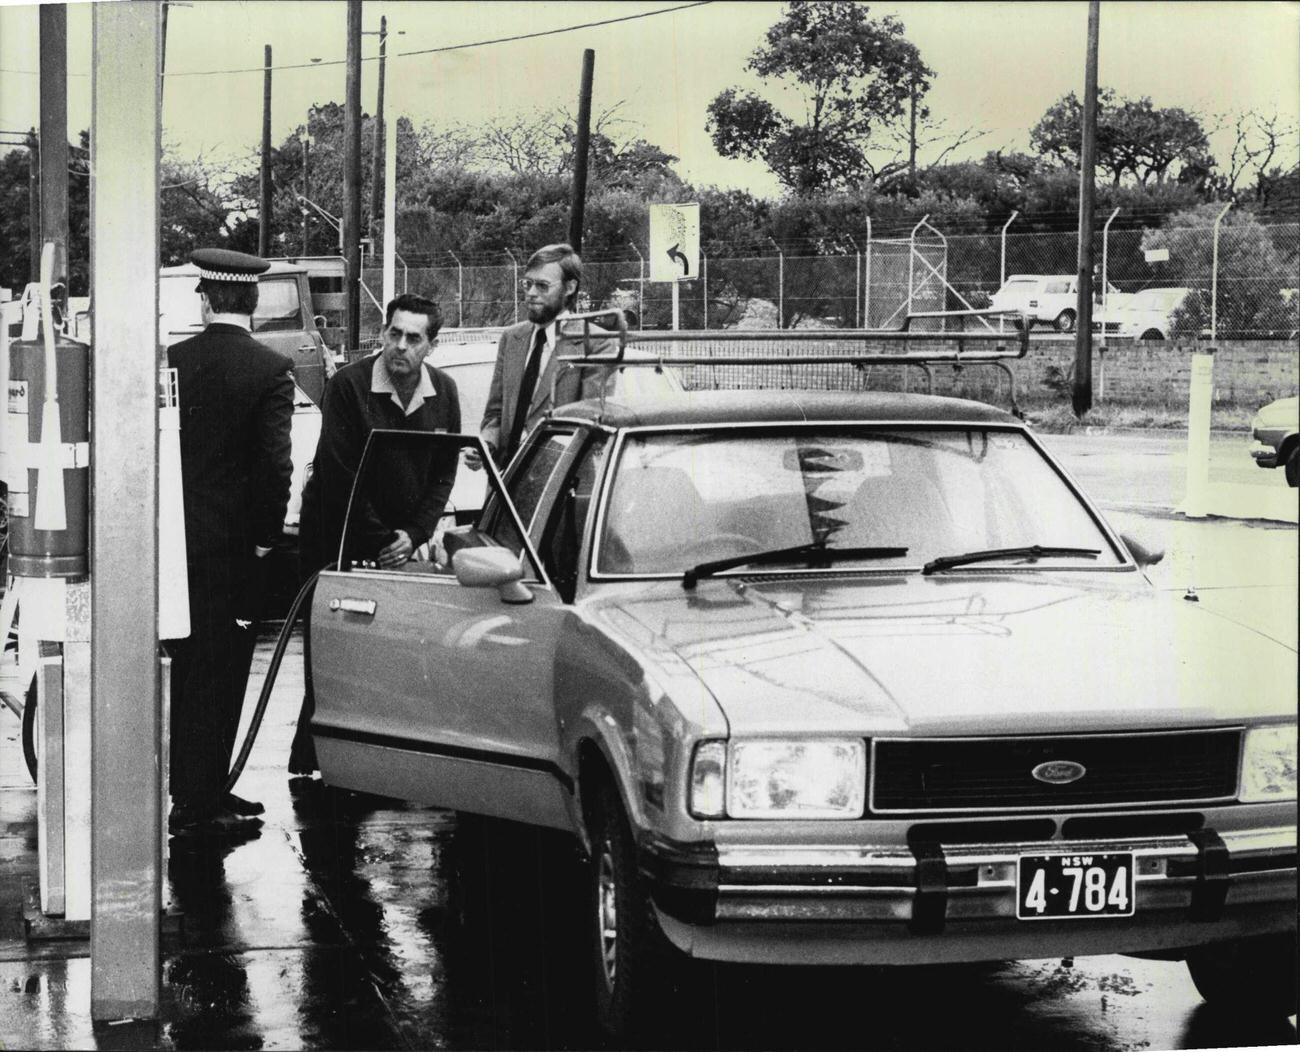 Police-Supervised Refueling at Total Self-Service Station in Alison Road